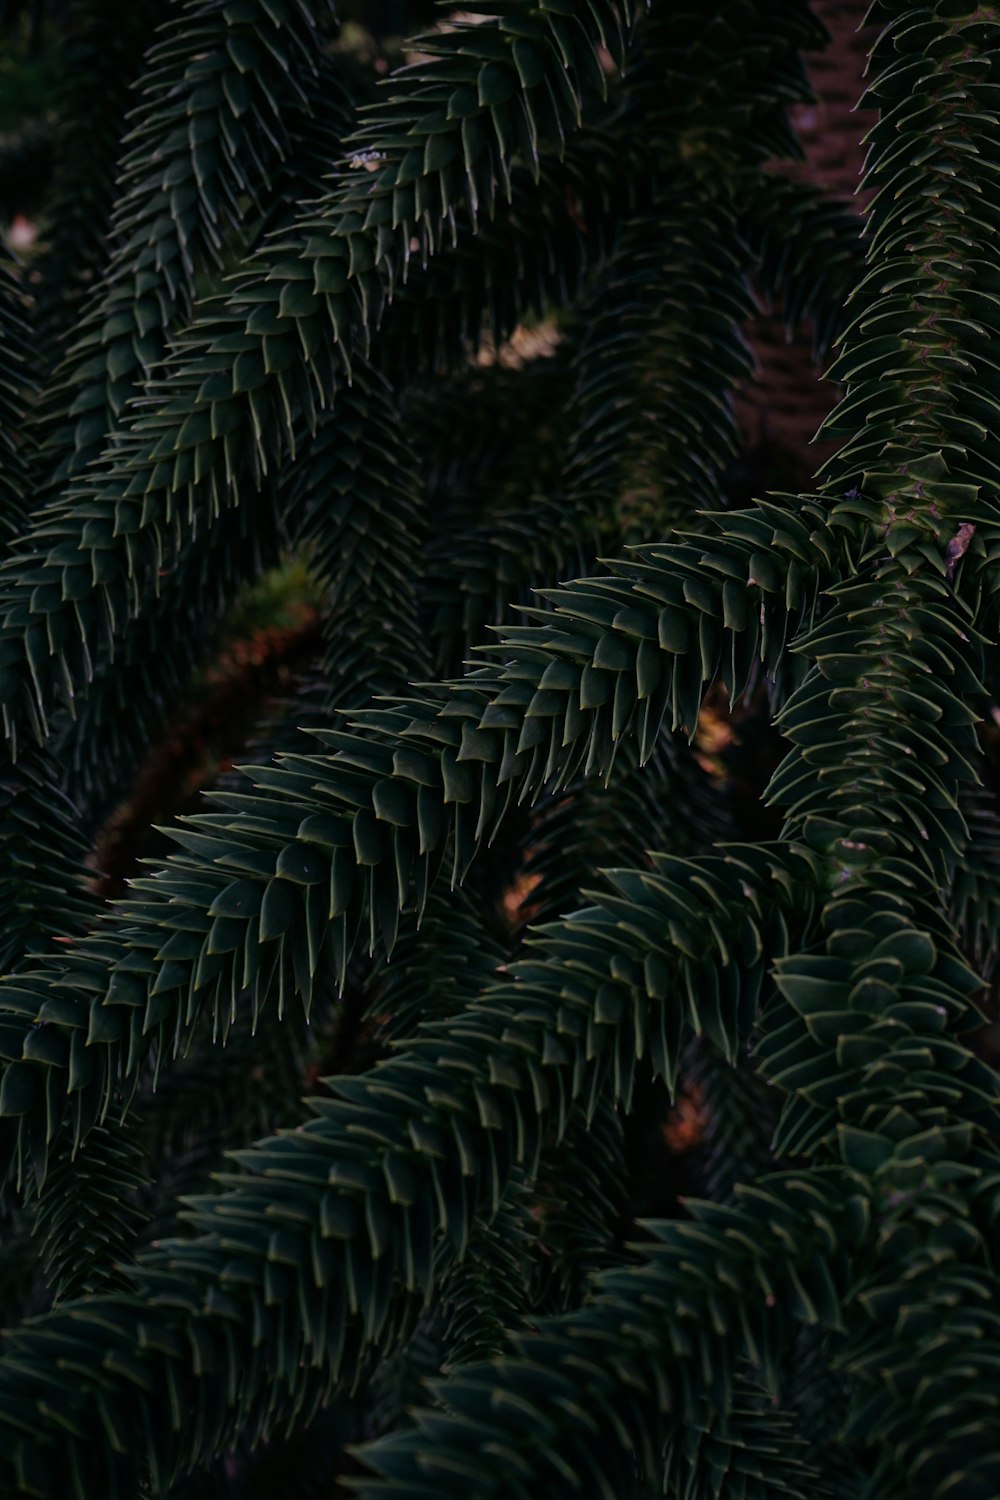 a close-up of a tree